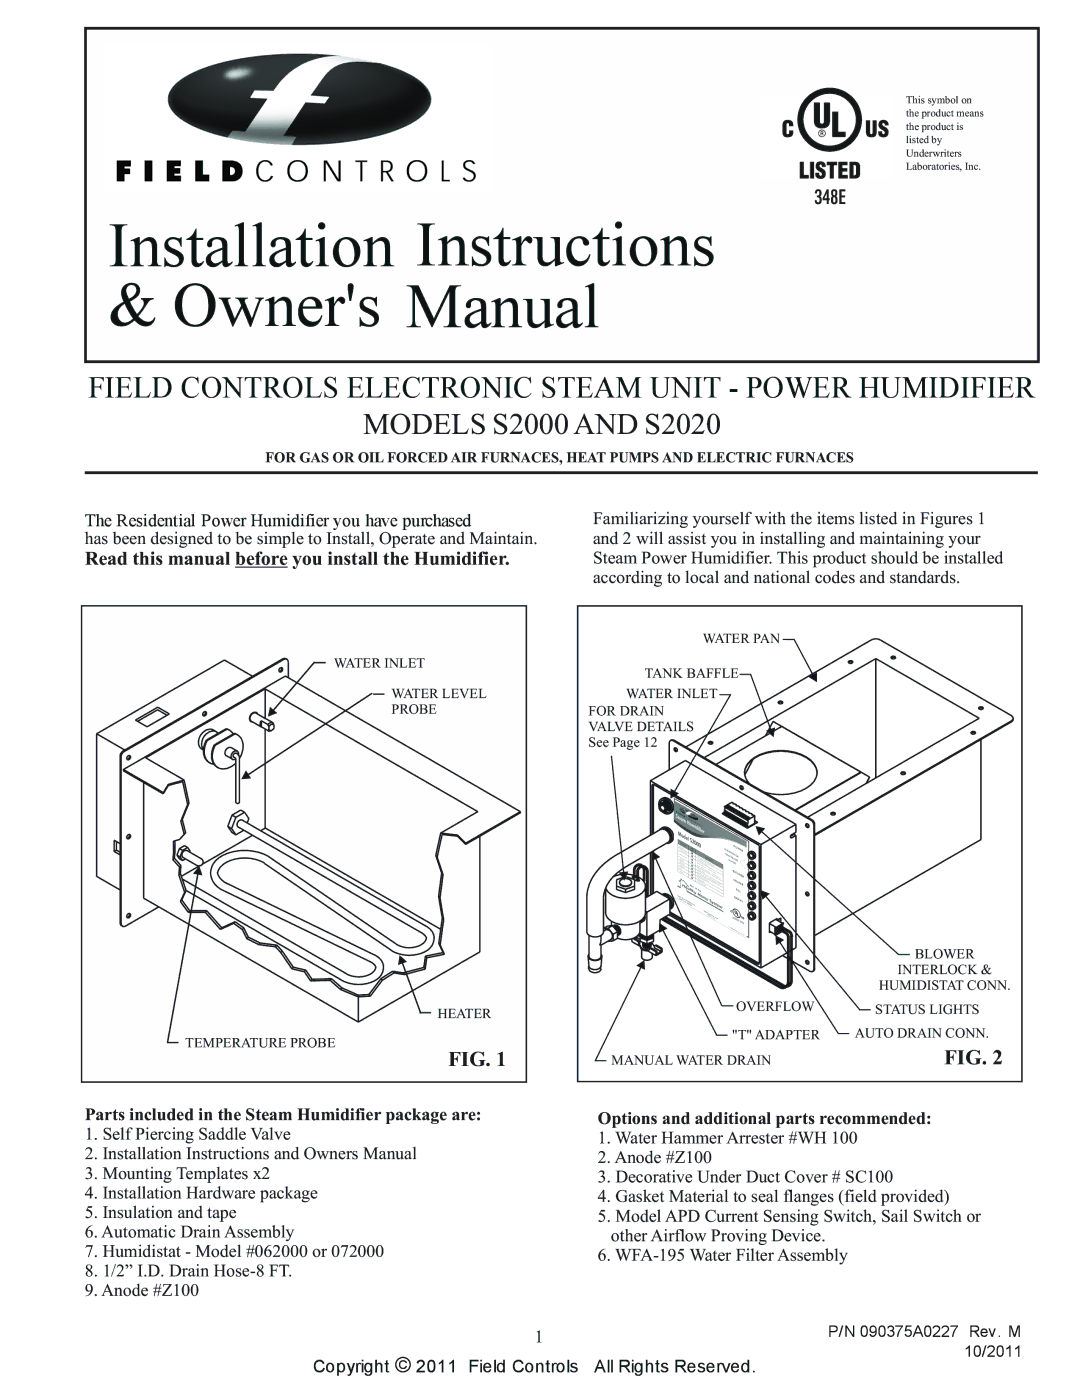 Field Controls S2000 installation instructions Parts included in the Steam Humidifier package are 